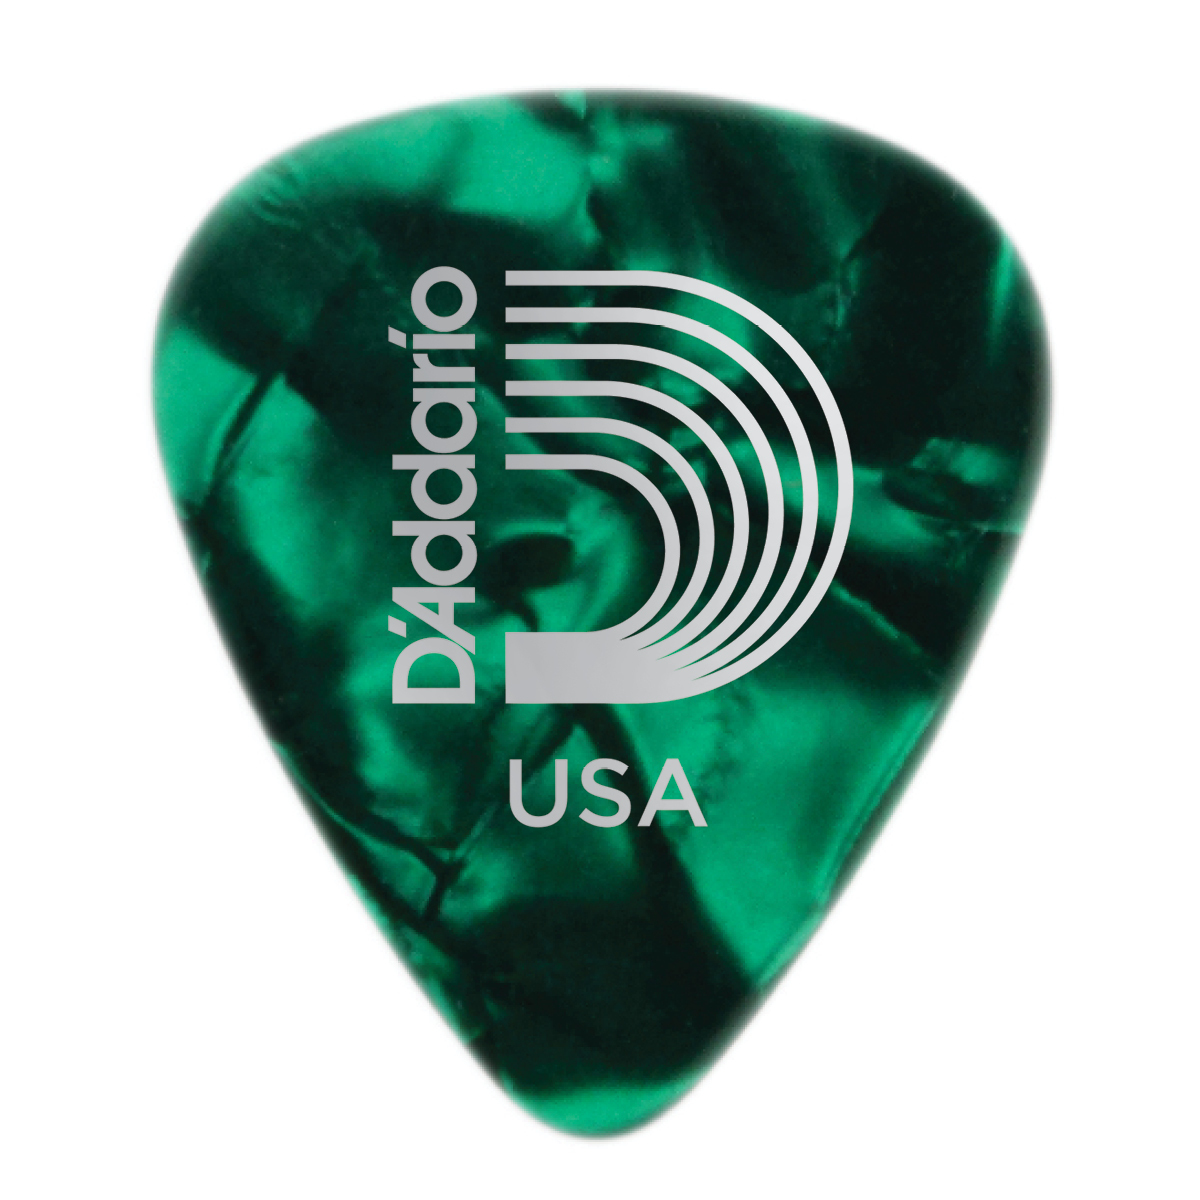 D'Addario Green Pearl Celluloid Guitar Pick, Extra Heavy